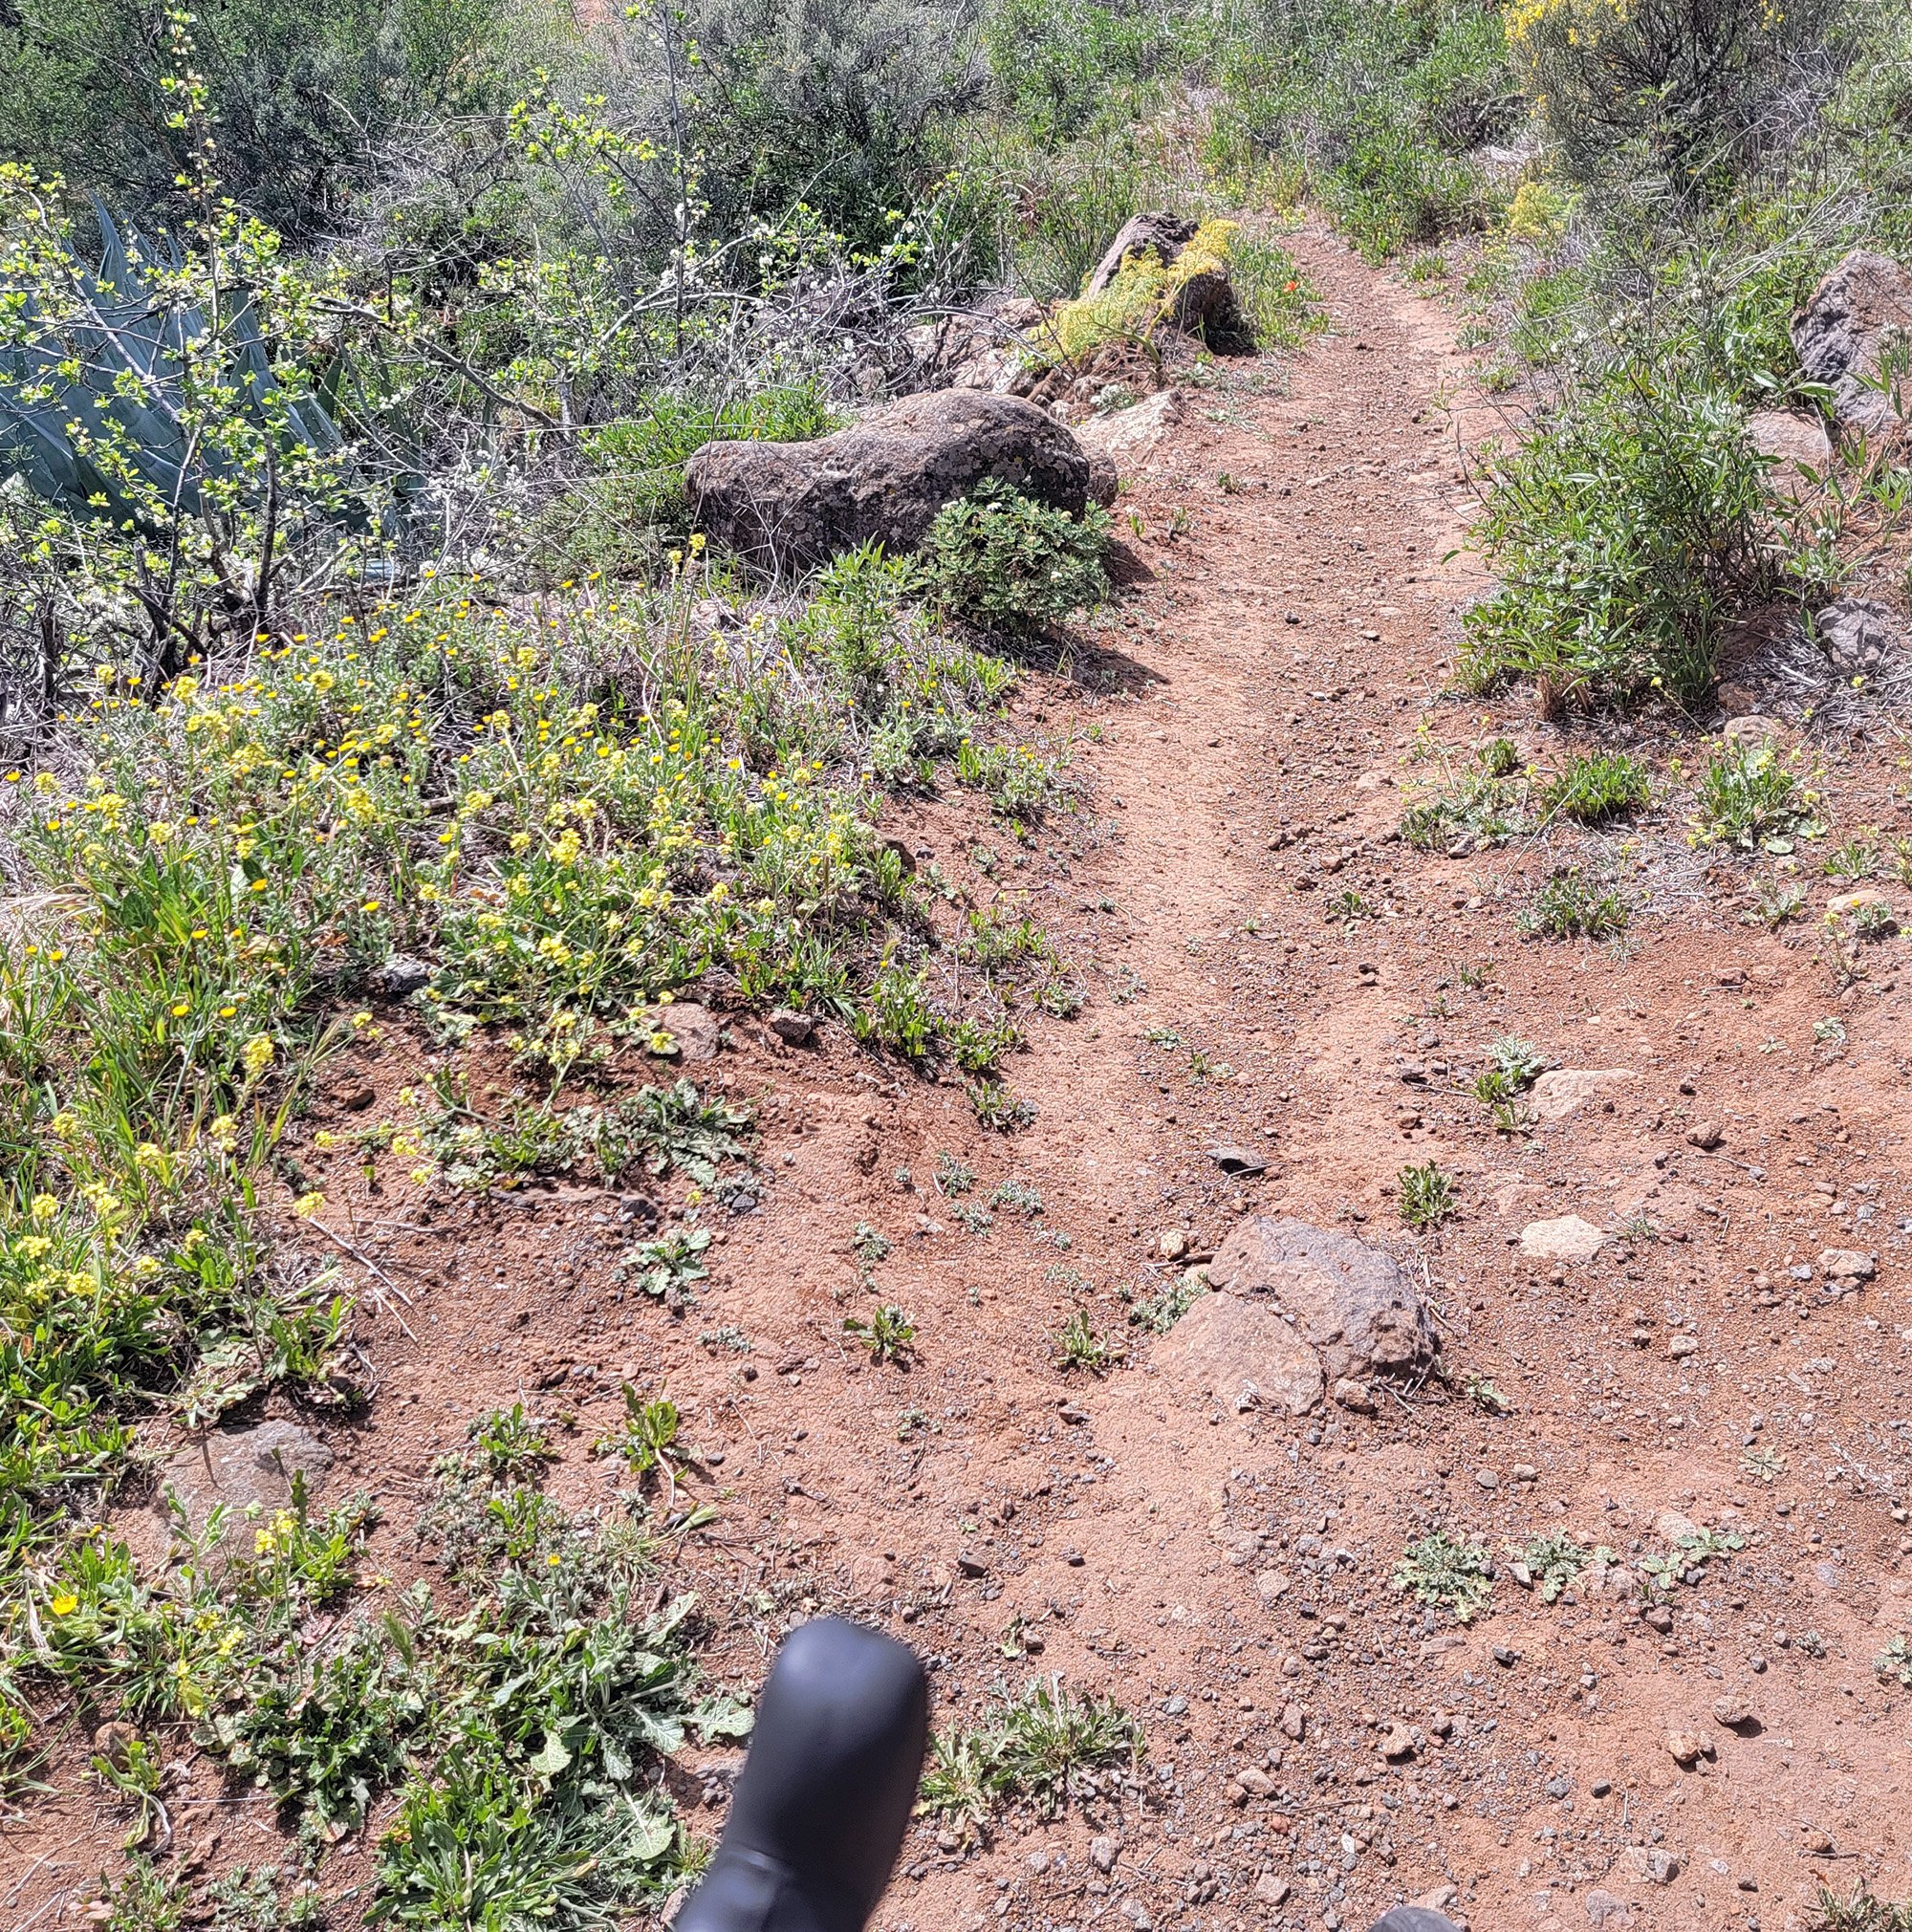 "Shortcut" road I wanted to check out going down. "Unpaved" can mean a lot of things for Strava. This is like a donkey trail or something, I'm not going on that.